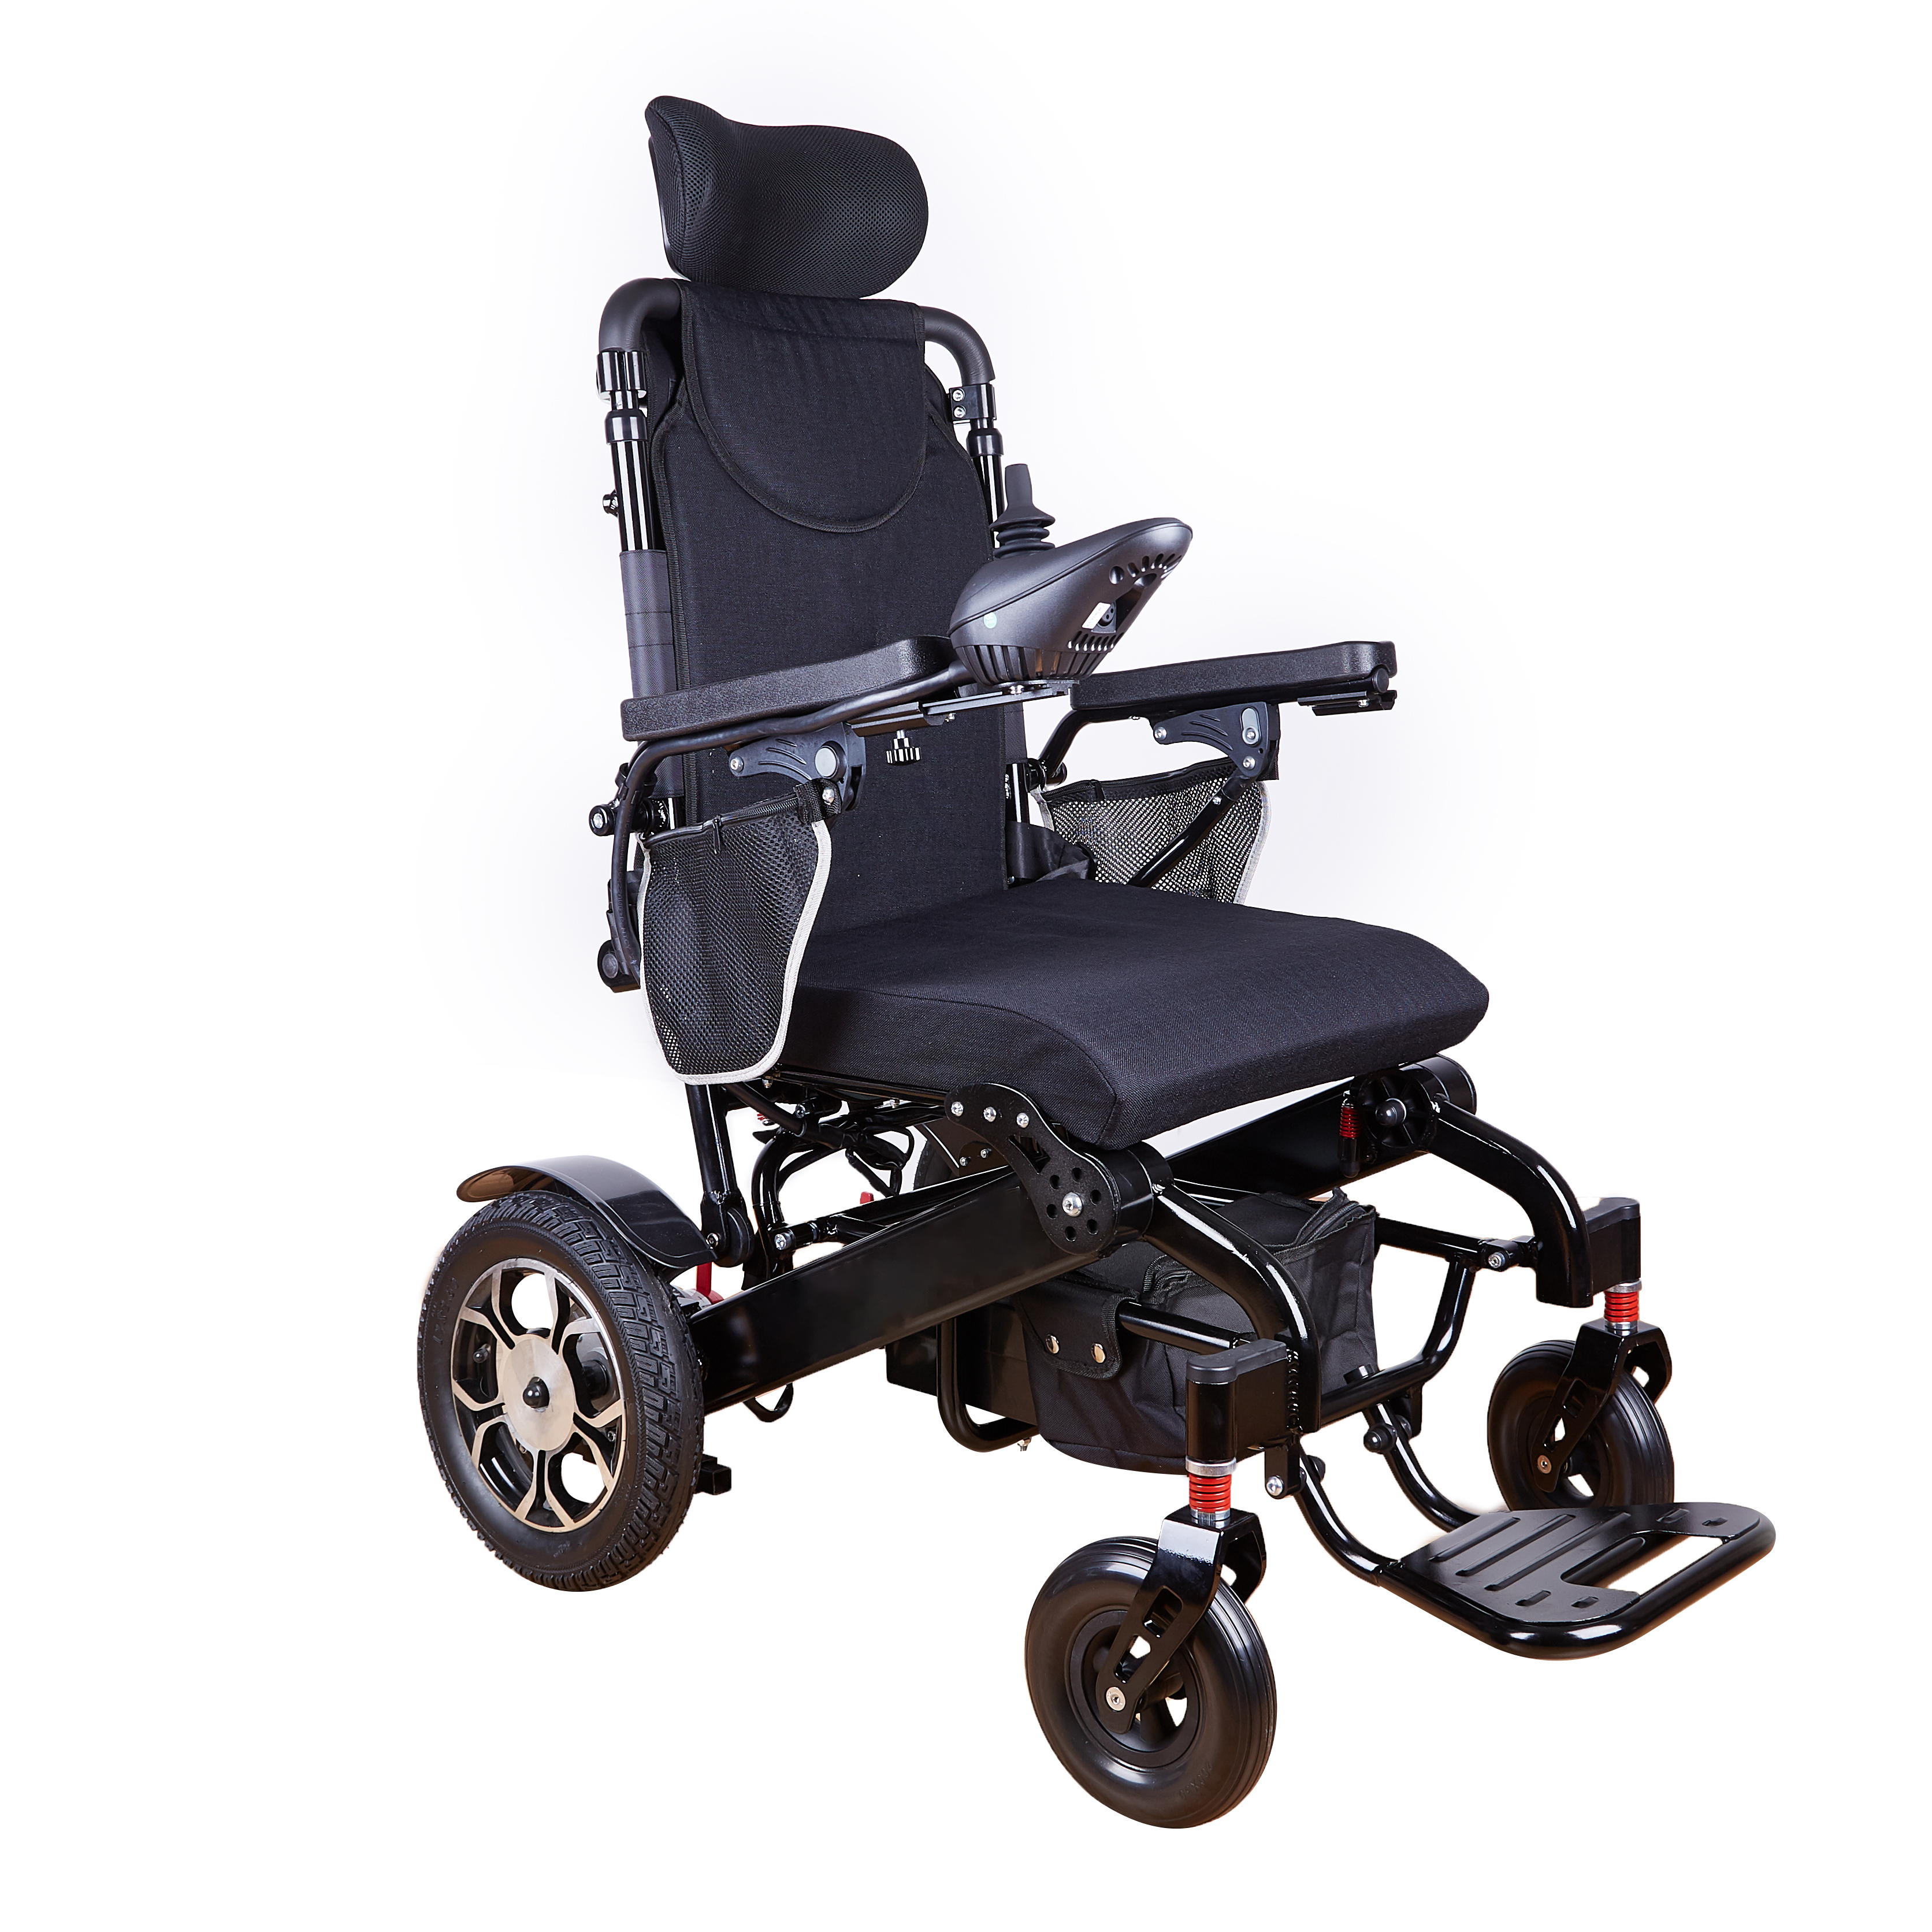 Factory Price Aluminum Alloy Lightweight EA8000 Electric Wheelchair with Lithium Battery Featured Image